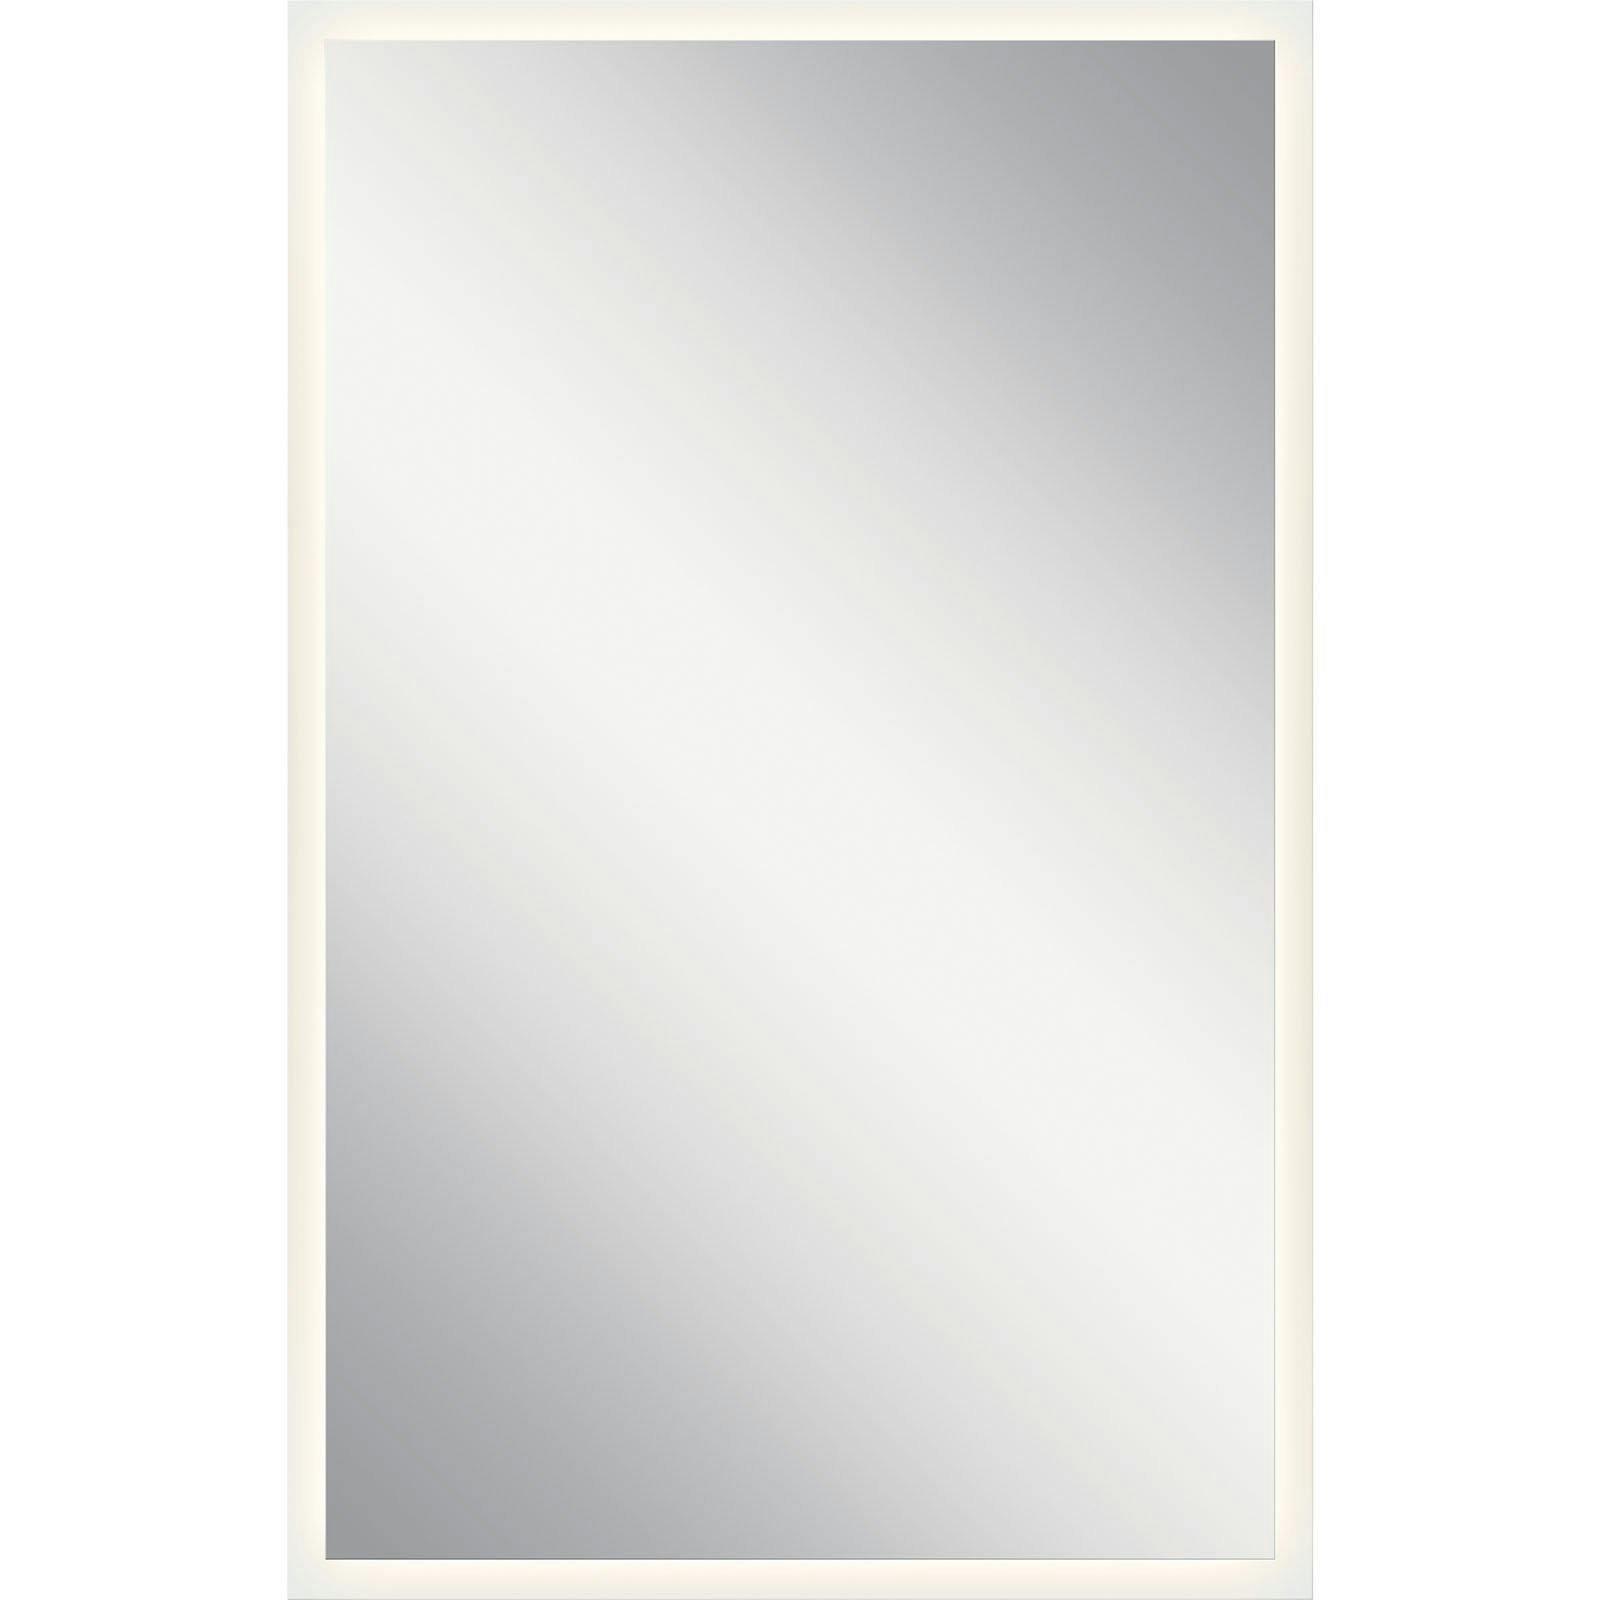 39" x 25" Rectangular LED Backlit Mirror hung vertically on a white background